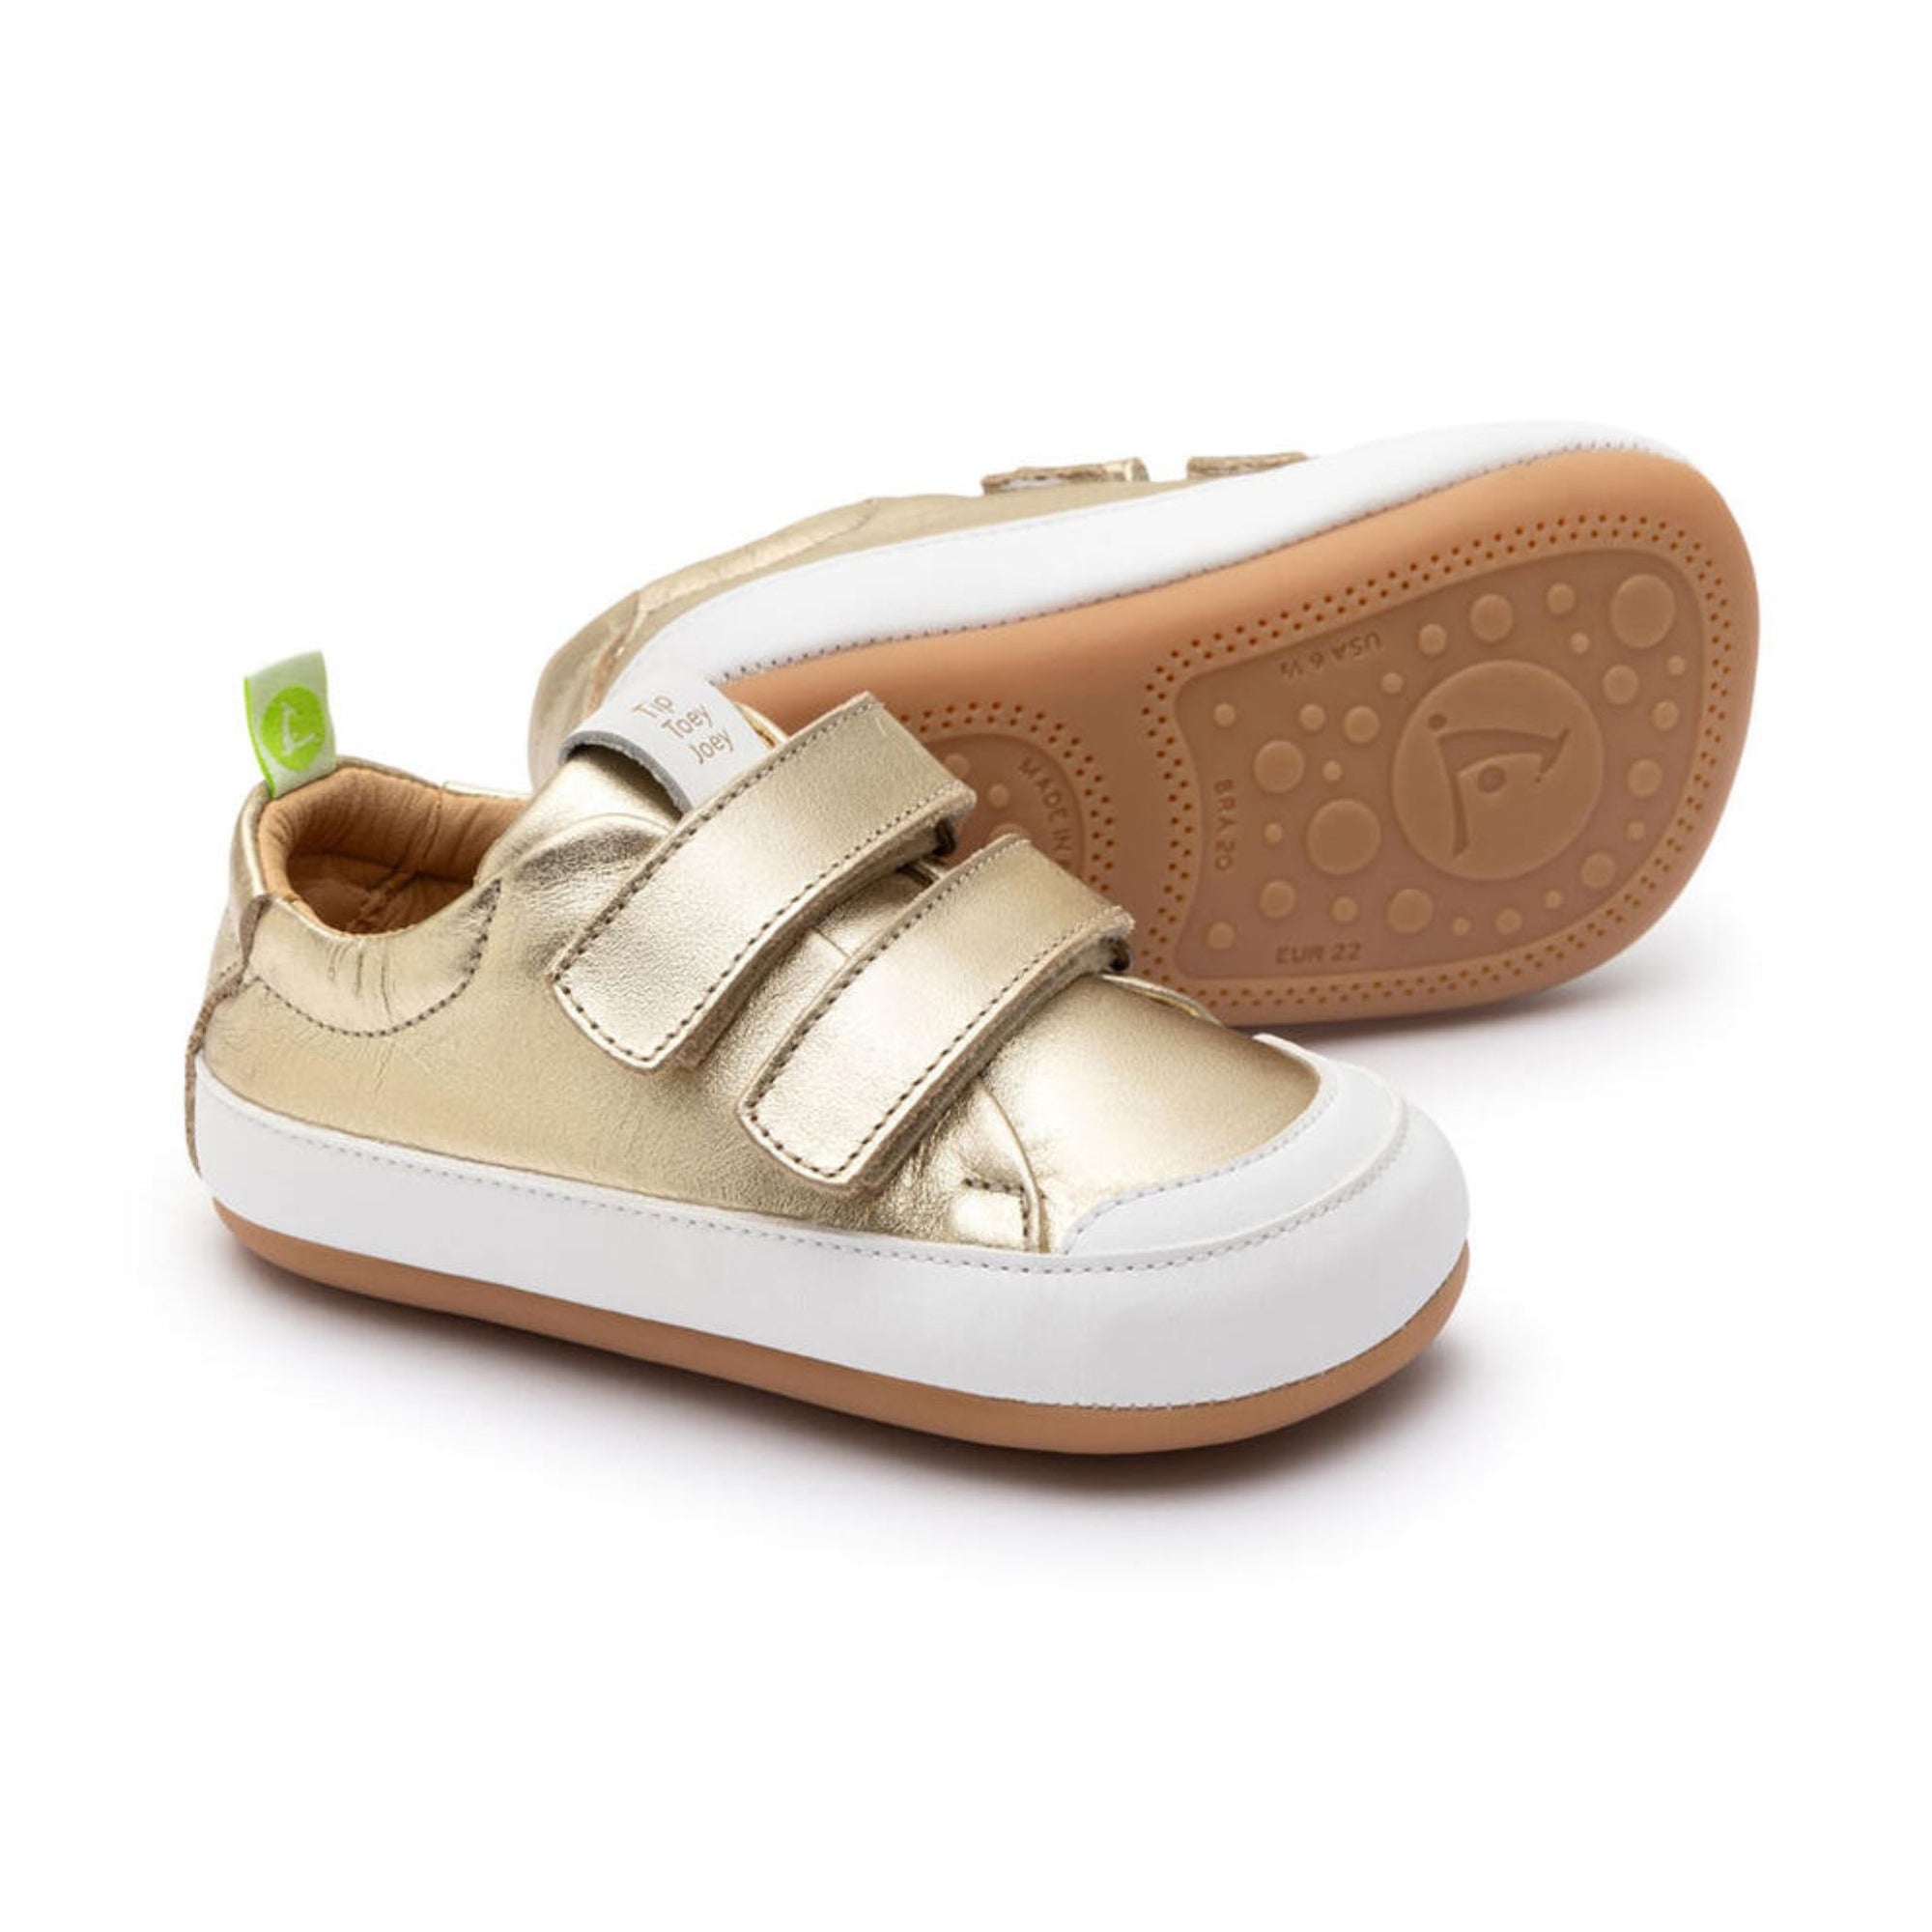 Tip Toey Joey Bossy Sneakers - Champagne / White (Baby)